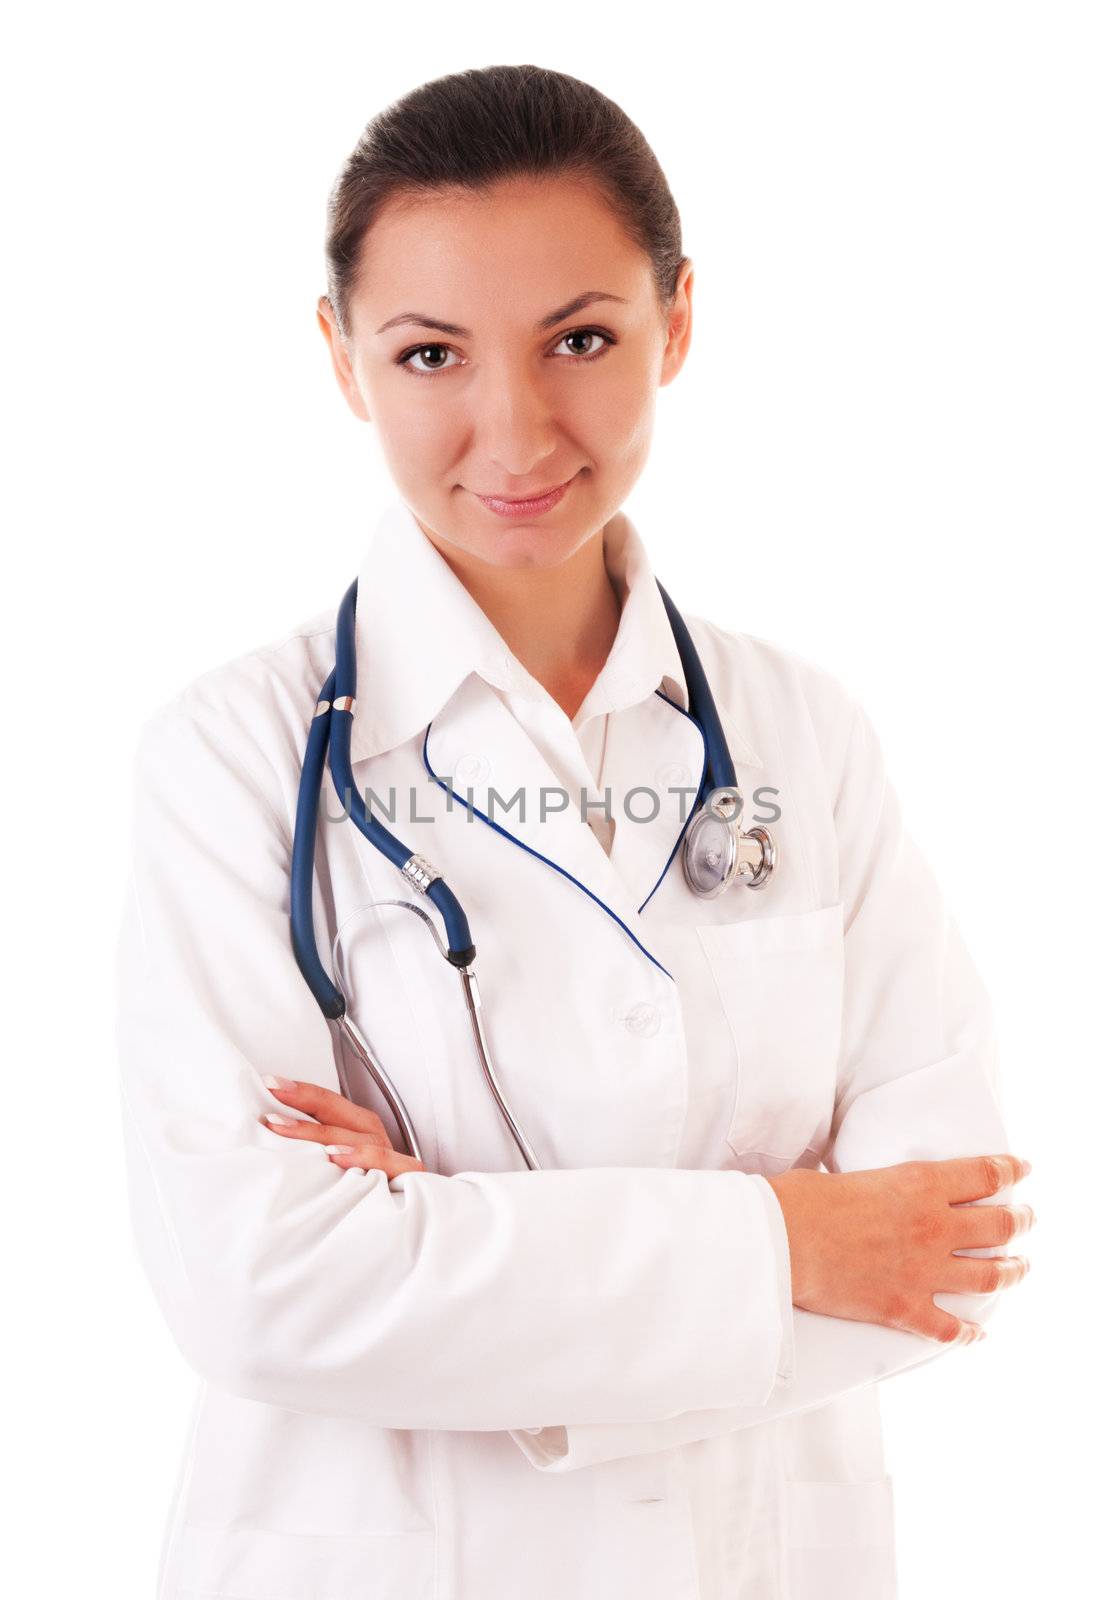 Smiling doctor with stethoscope isolated on white background